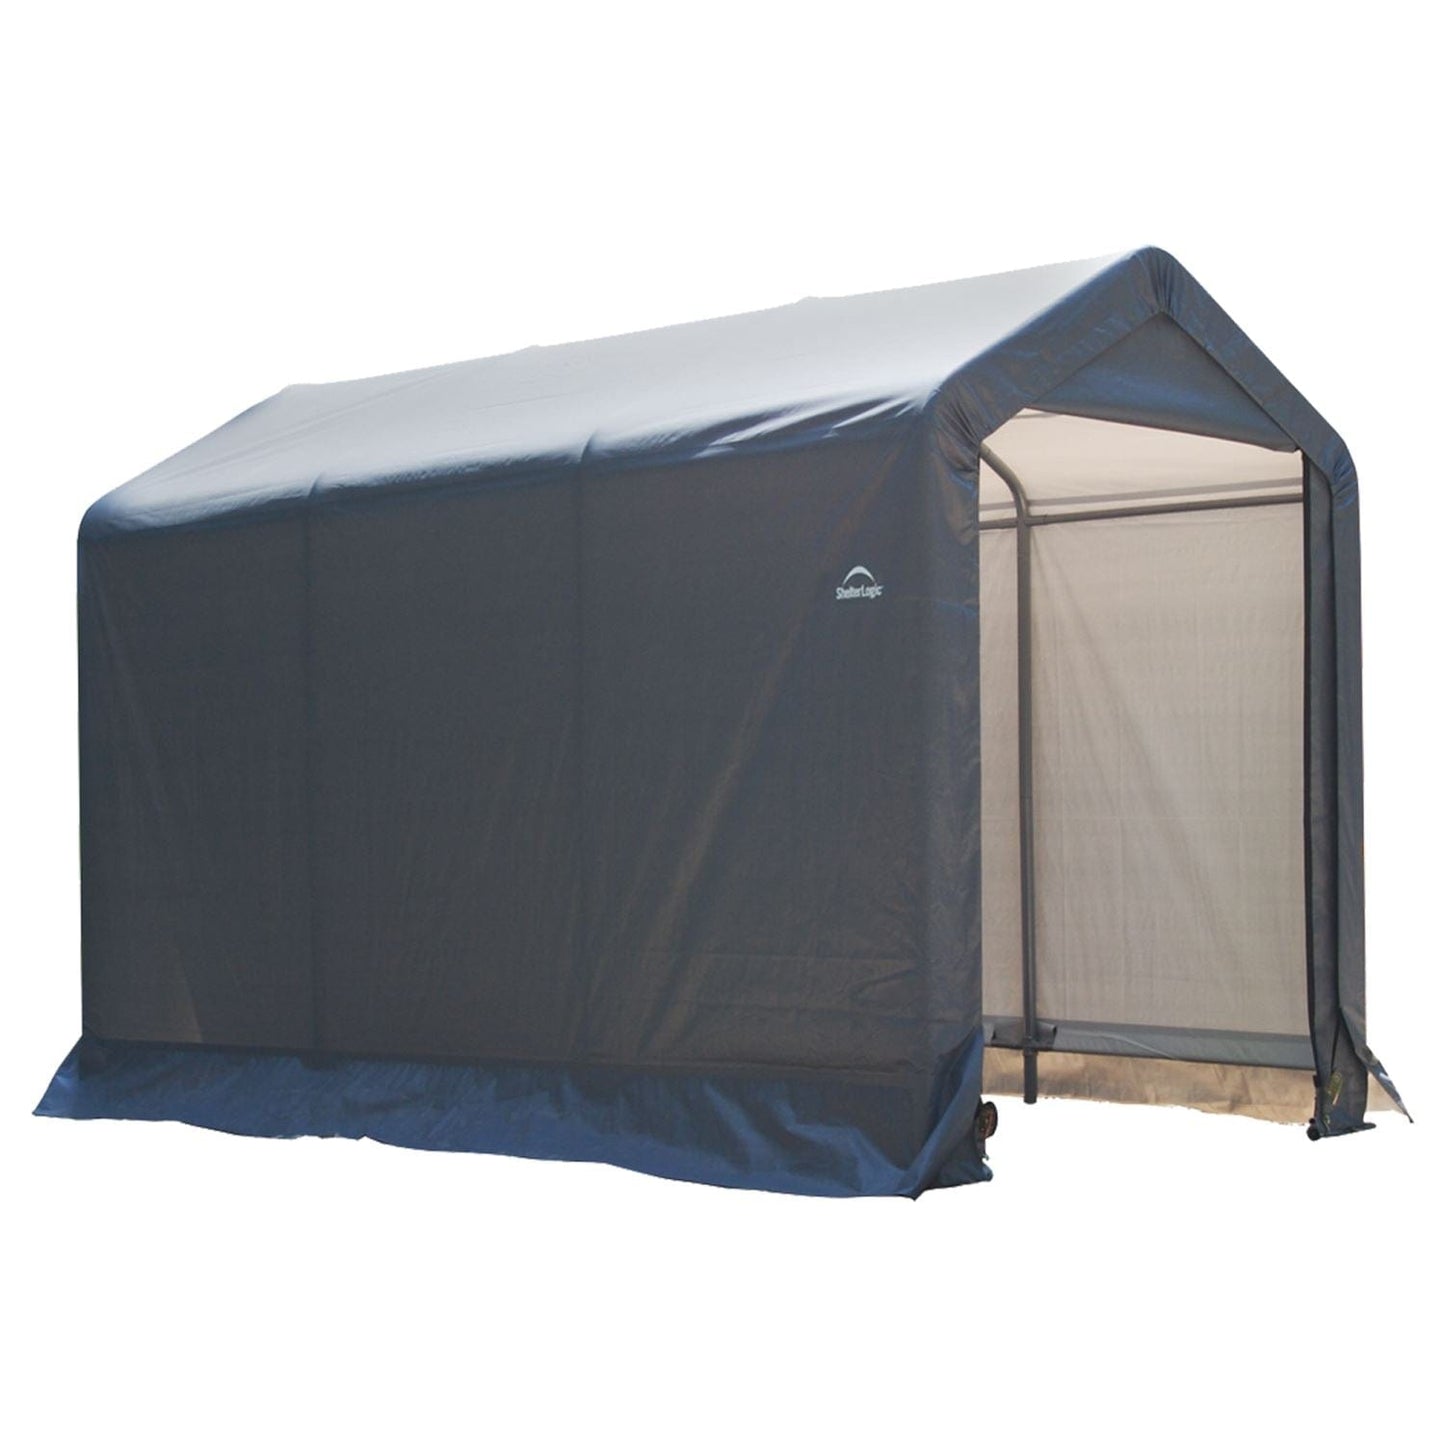 ShelterLogic Shed-in-a-Box 6 x 10 x 6 ft. 6 in. Gray - mygreenhousestore.com